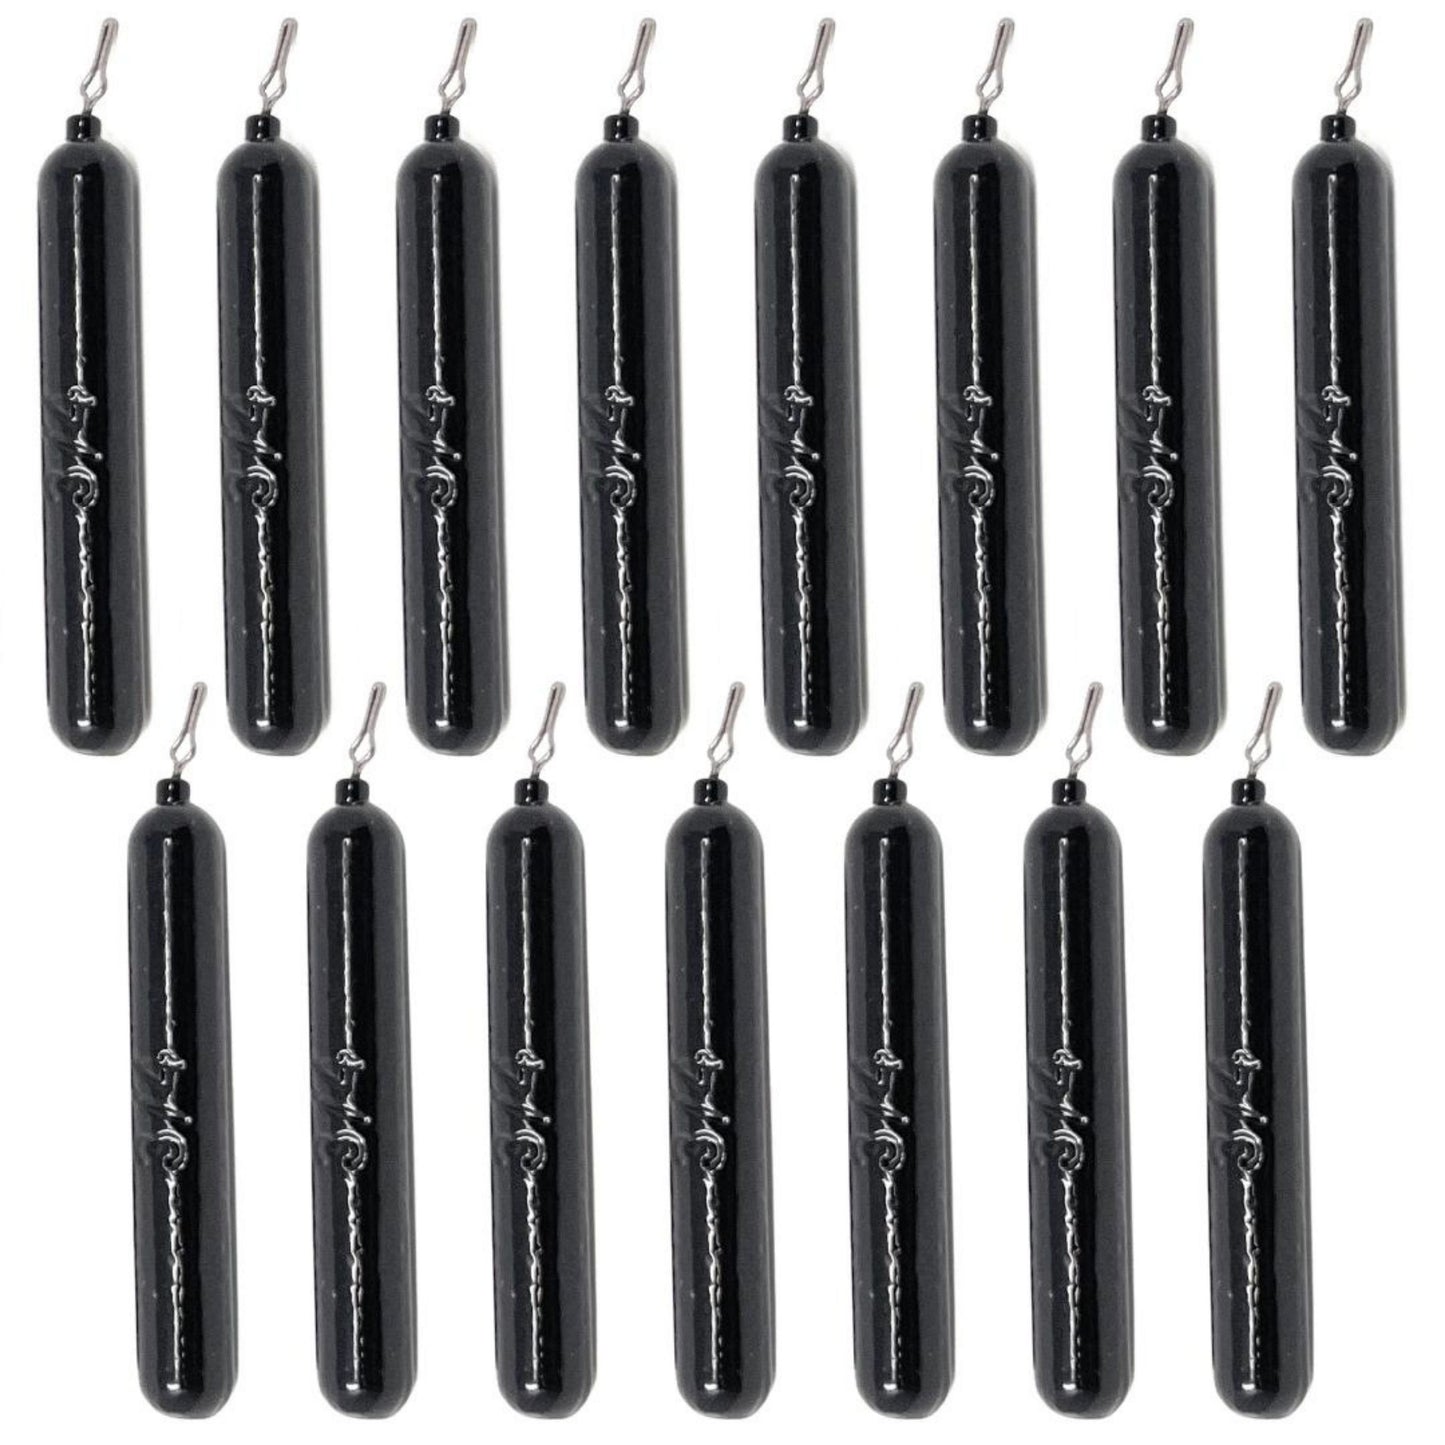 Reaction Tackle Lead Drop Shot Weights - Ideal for Bass Fishing- Bulk Packs or Kits